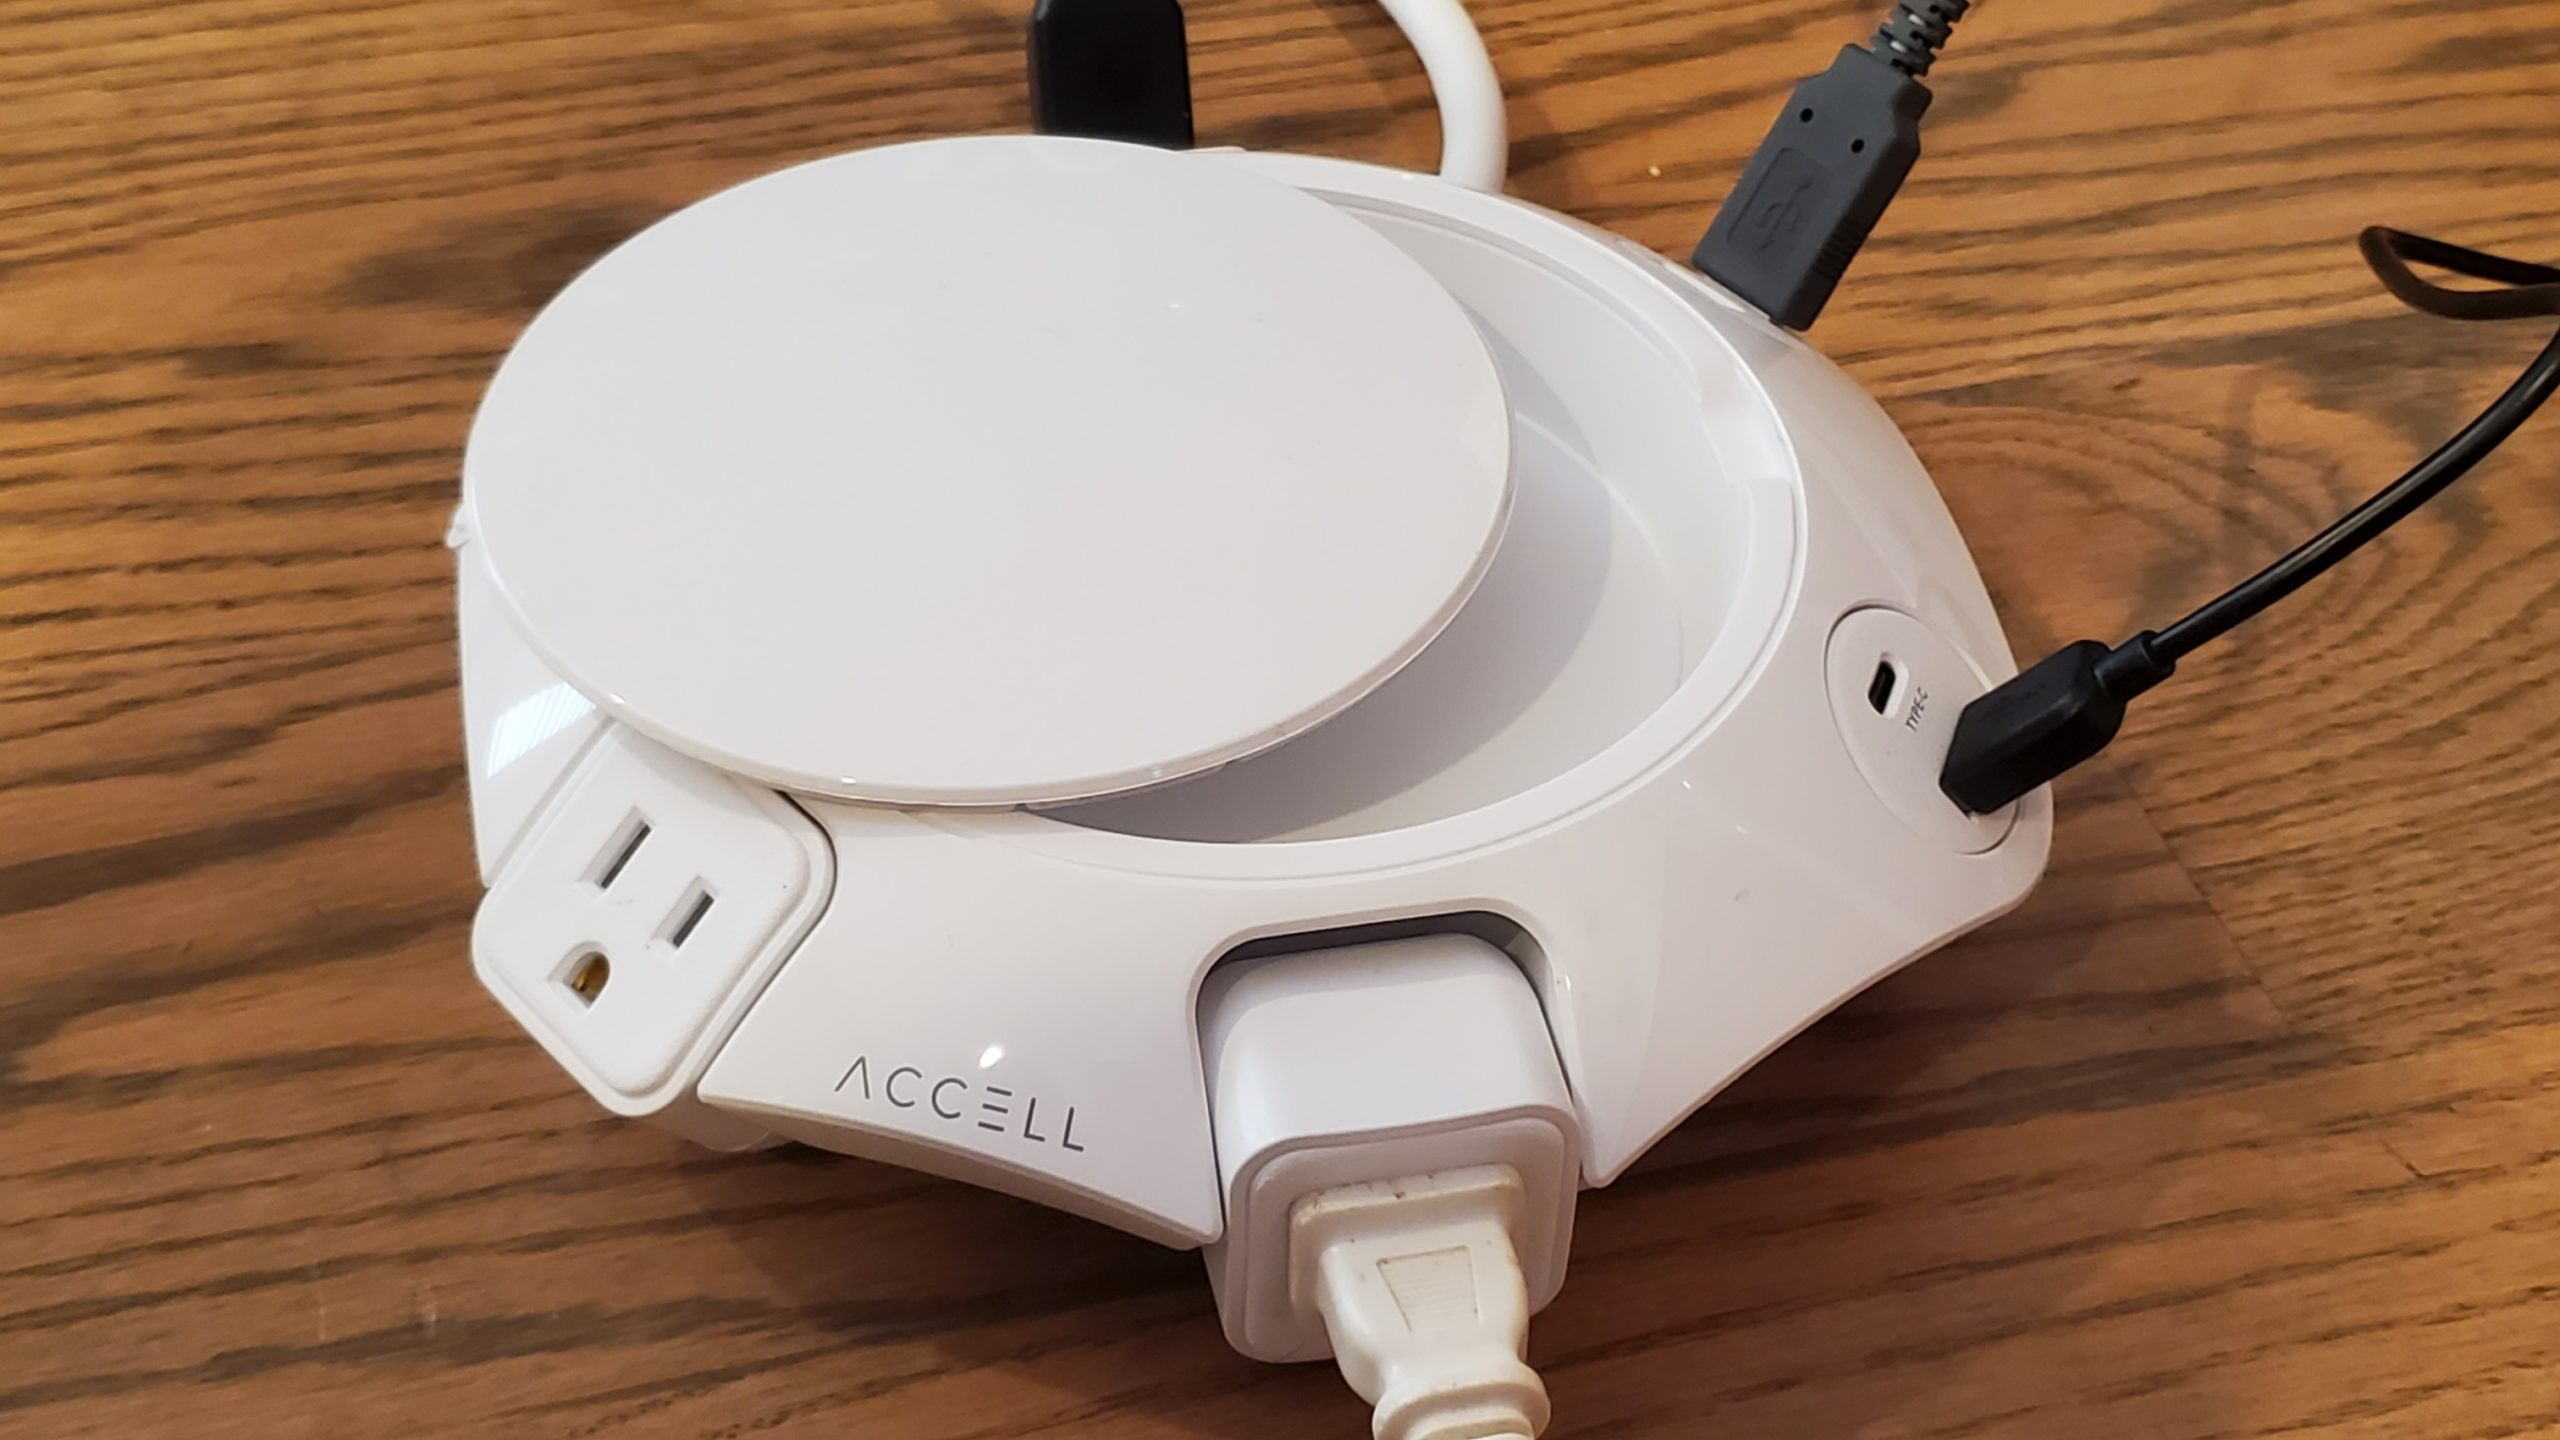 REVIEW:  Accell Power Dot Power Station